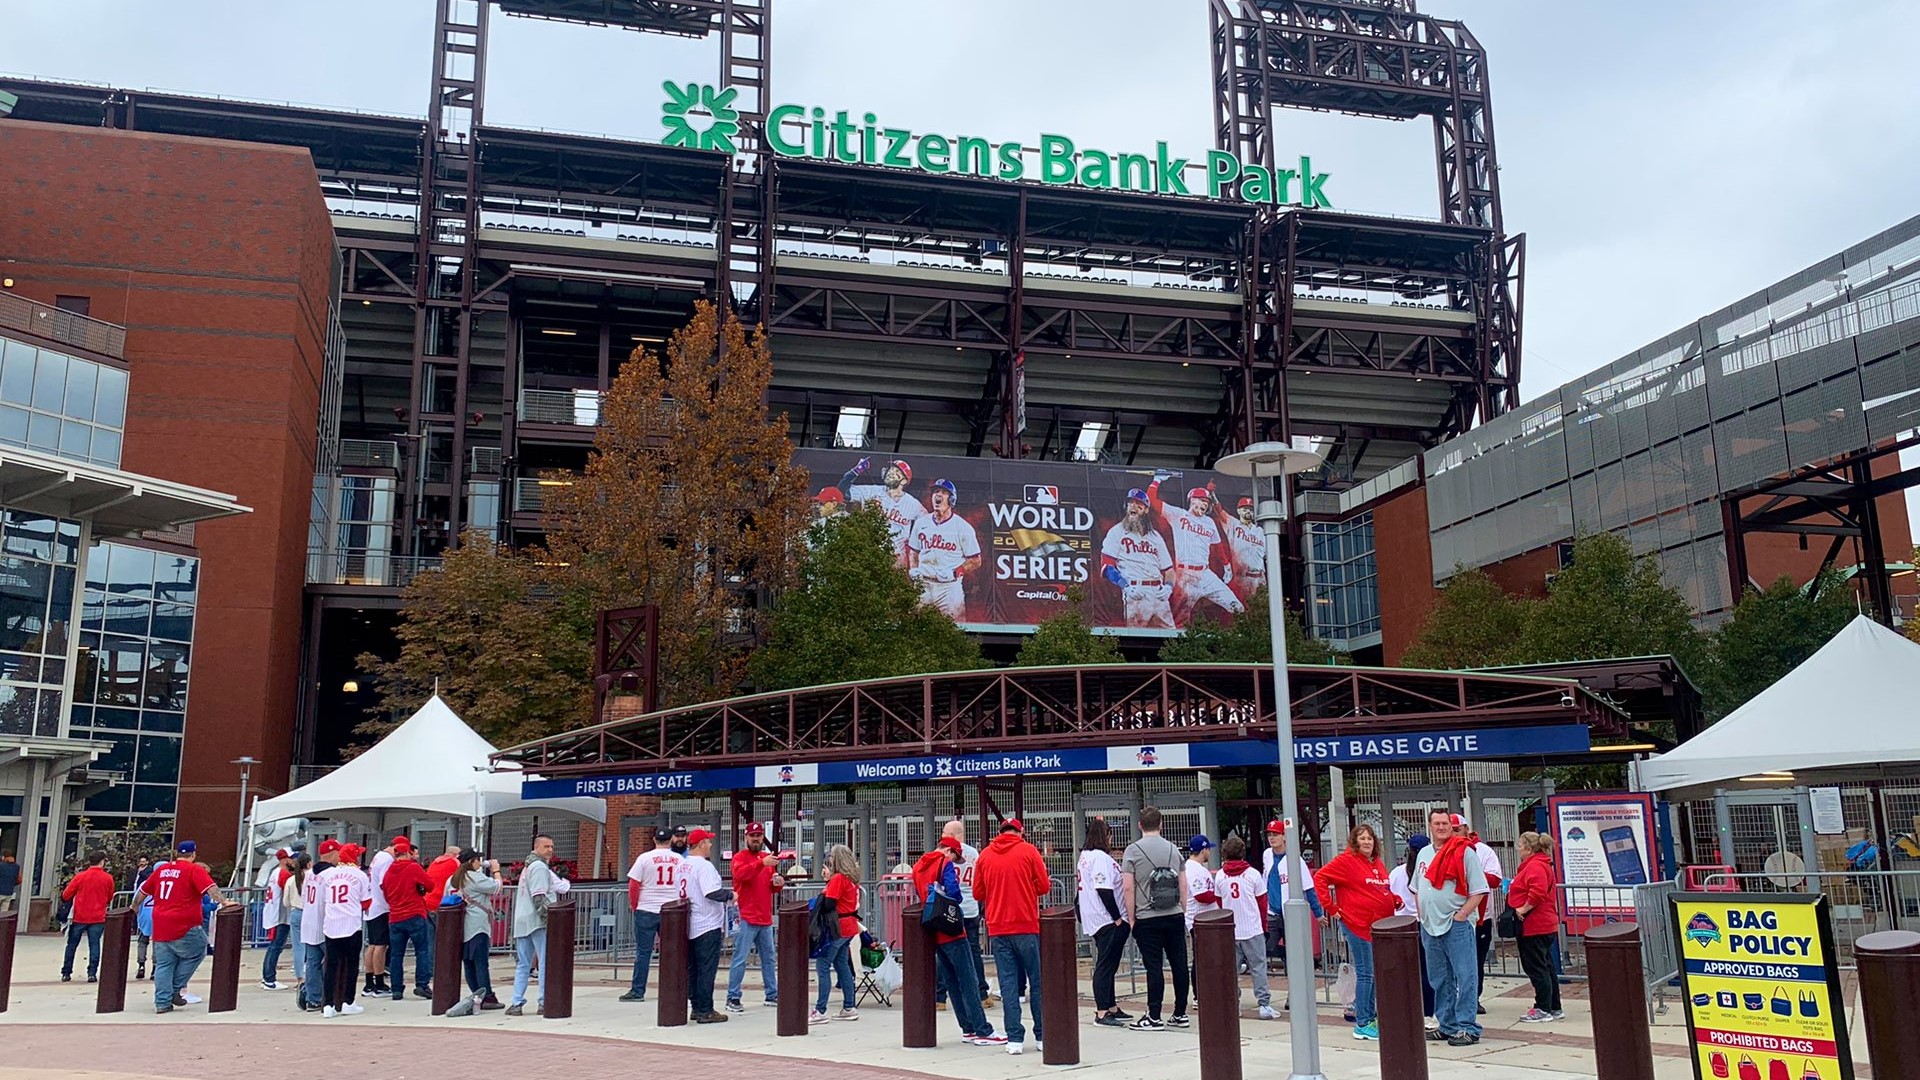 Getting a preview of Game 3 of the World Series from Citizens Bank